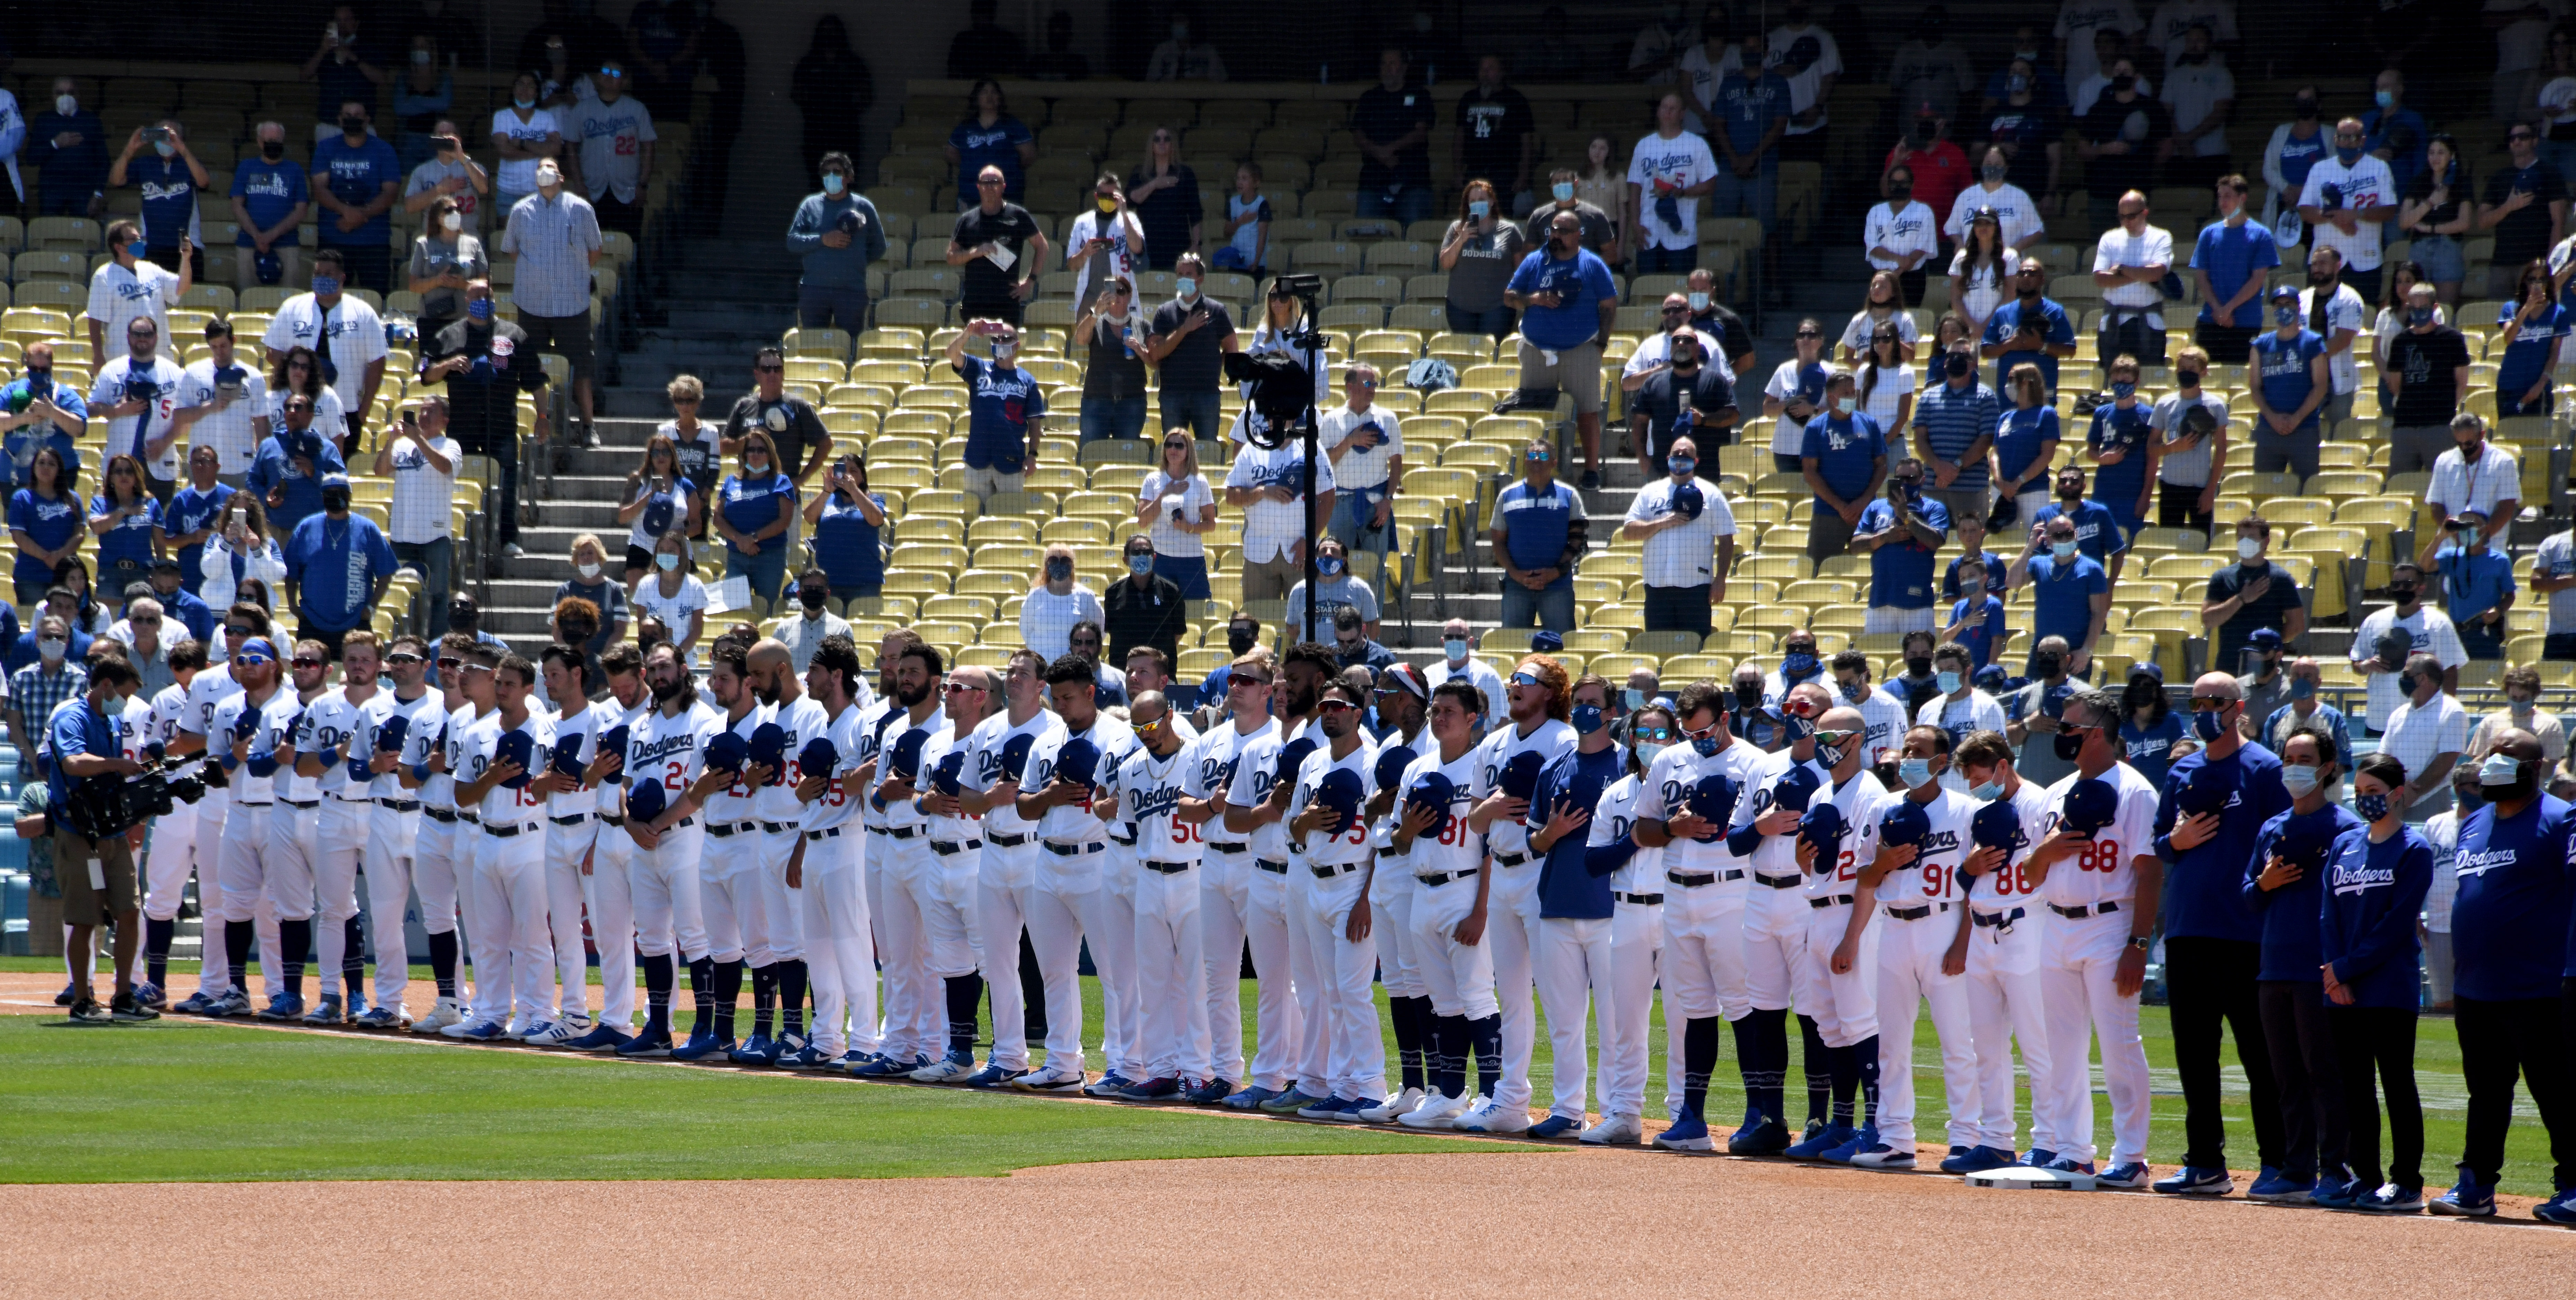 The 2020 Los Angeles Dodgers opening day team roster - Los Angeles